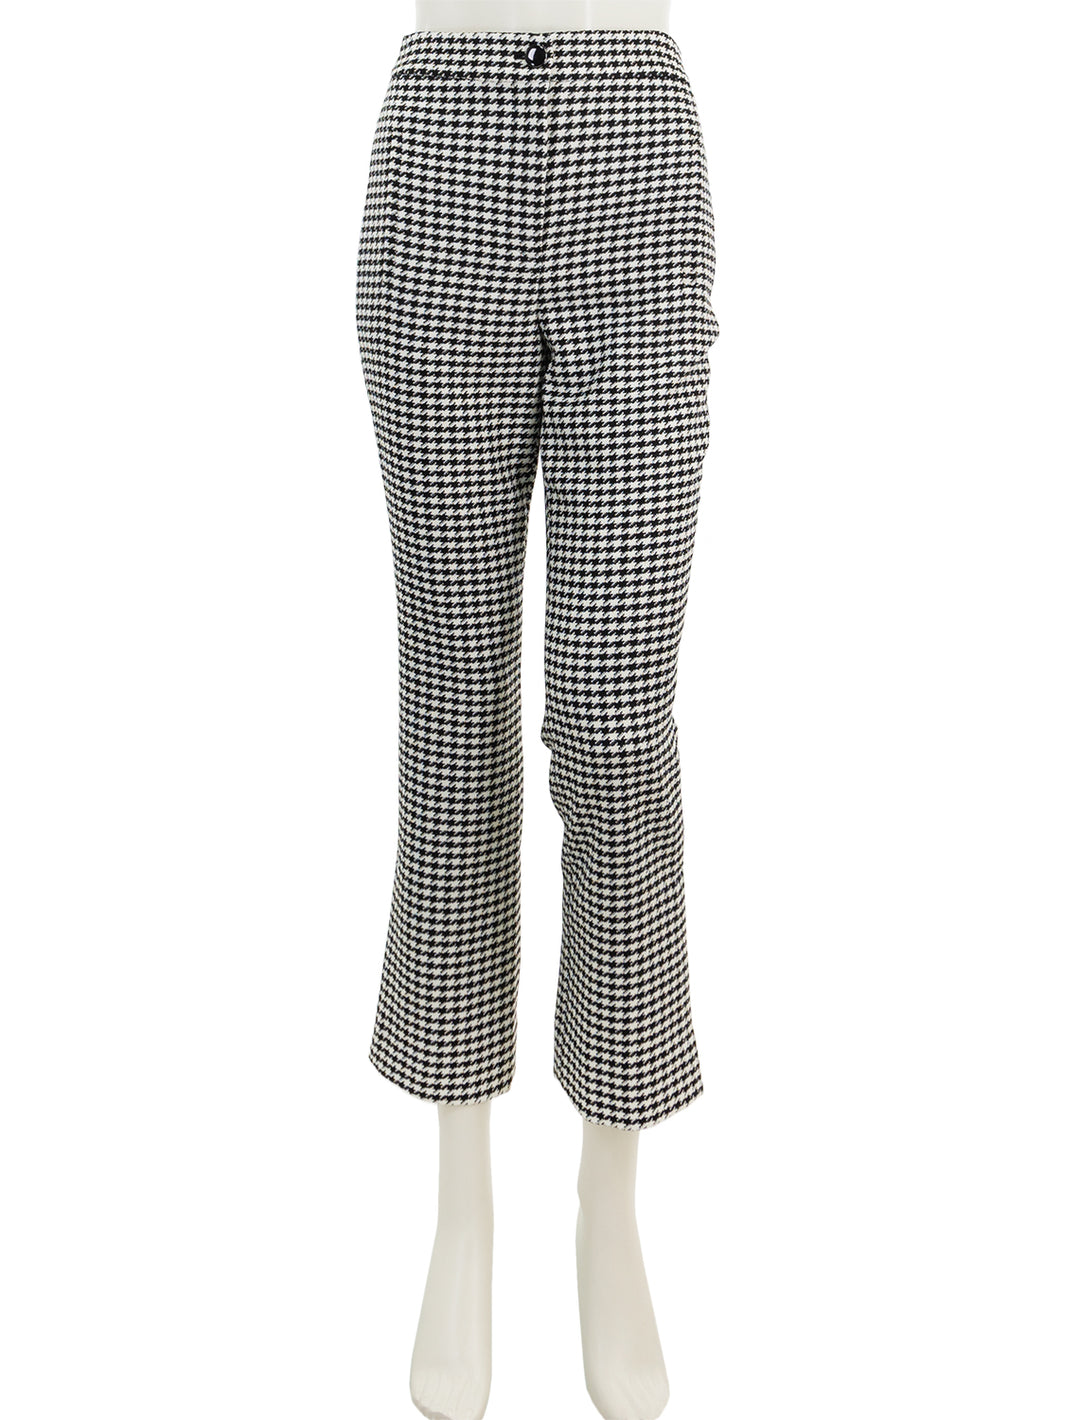 Front view of Veronica Beard's arte pant in black and off white.